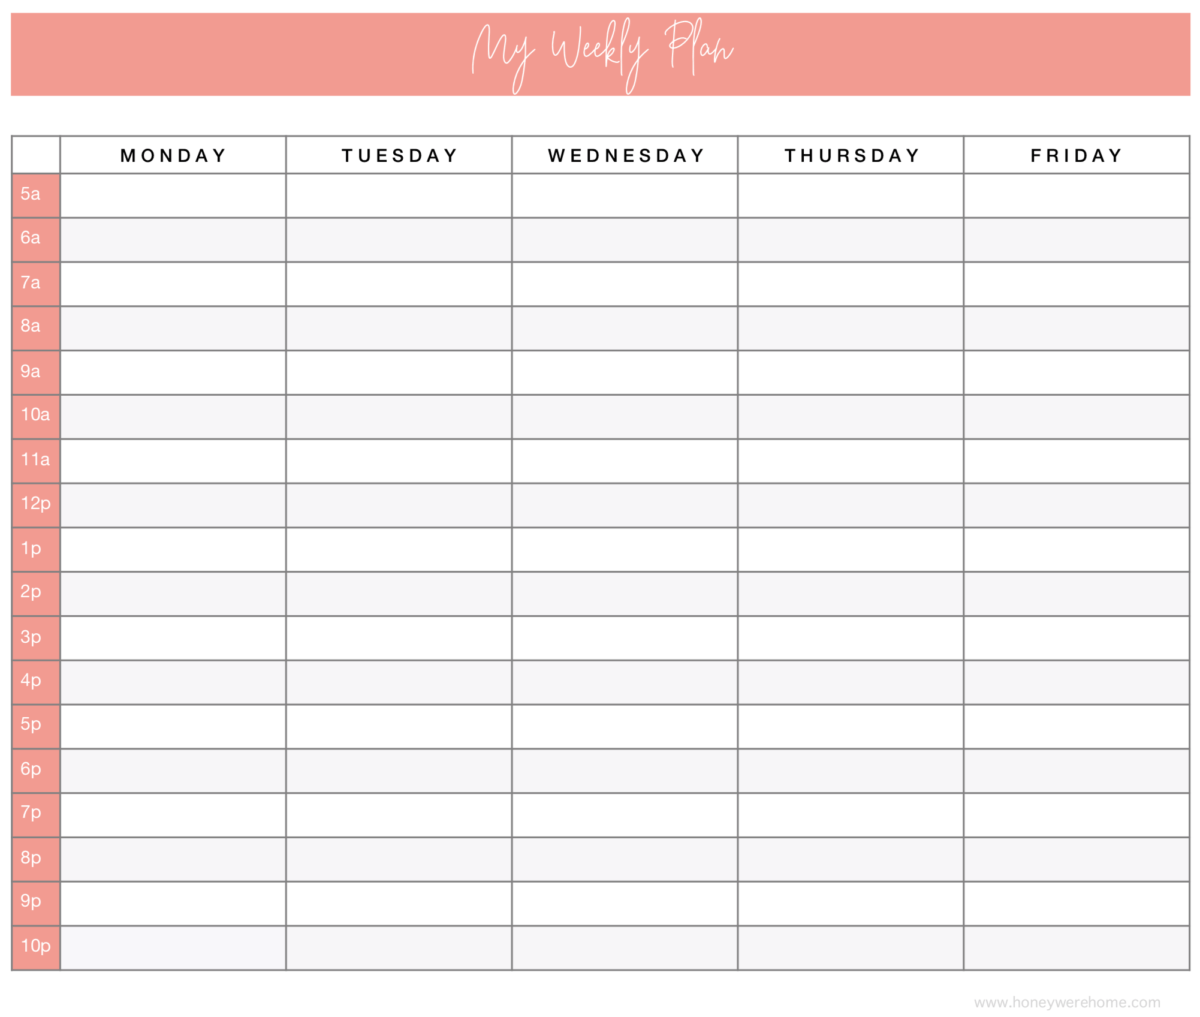 how to plan your week free planner